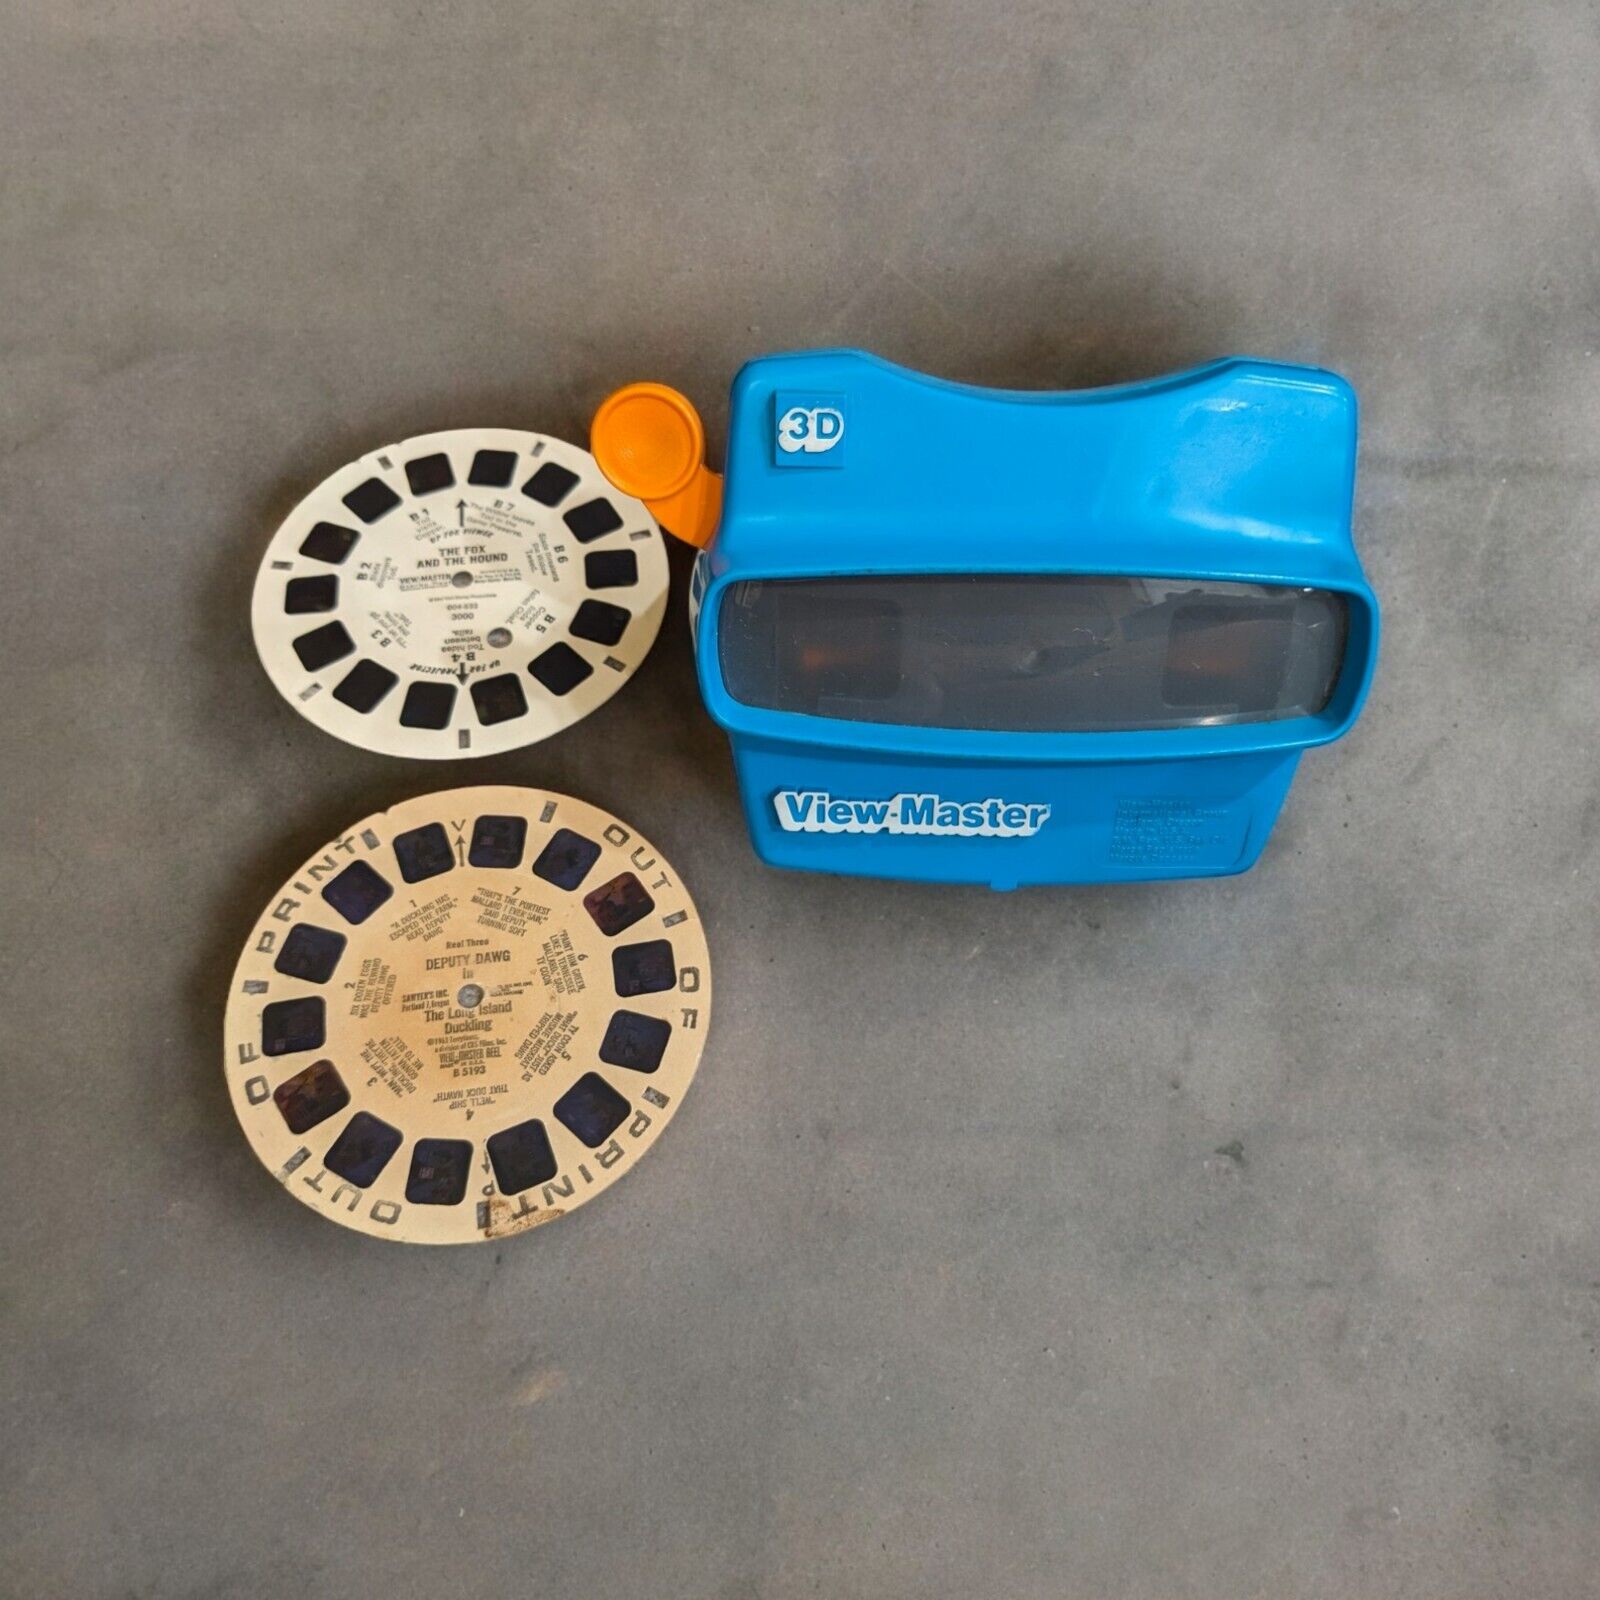 Vintage BLUE 3D View-Master Viewer Flat Orange Handle Made In The USA W/ 2 Reels